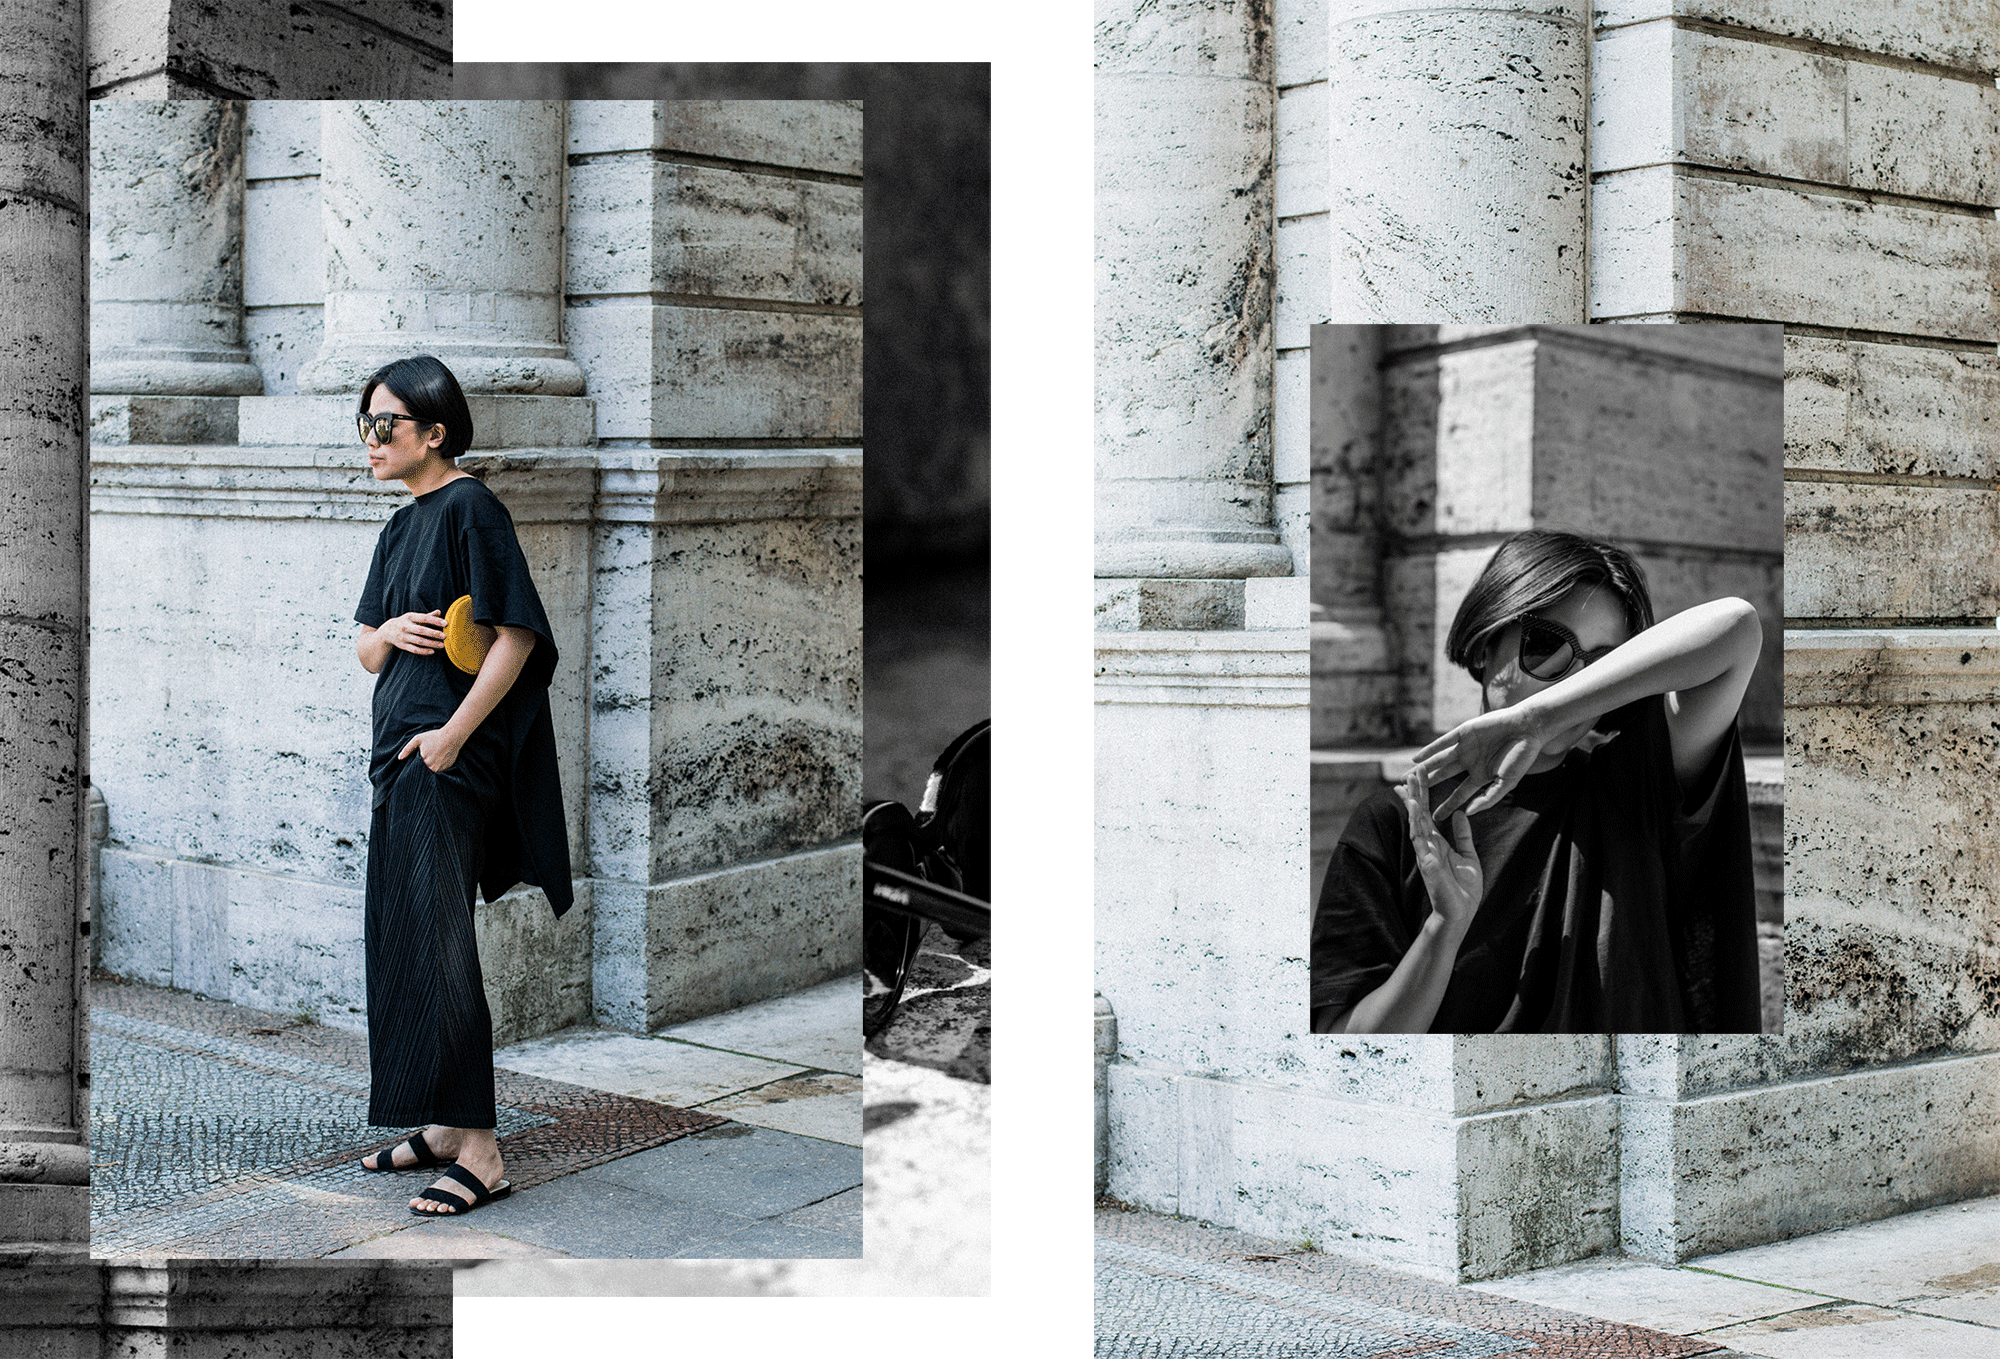 MM6 Maison Margiela T-Shirt / Casual all black everything look by Alice M. Huynh - iheartAlice.com Lifestyle, Travel & Fashioblog 